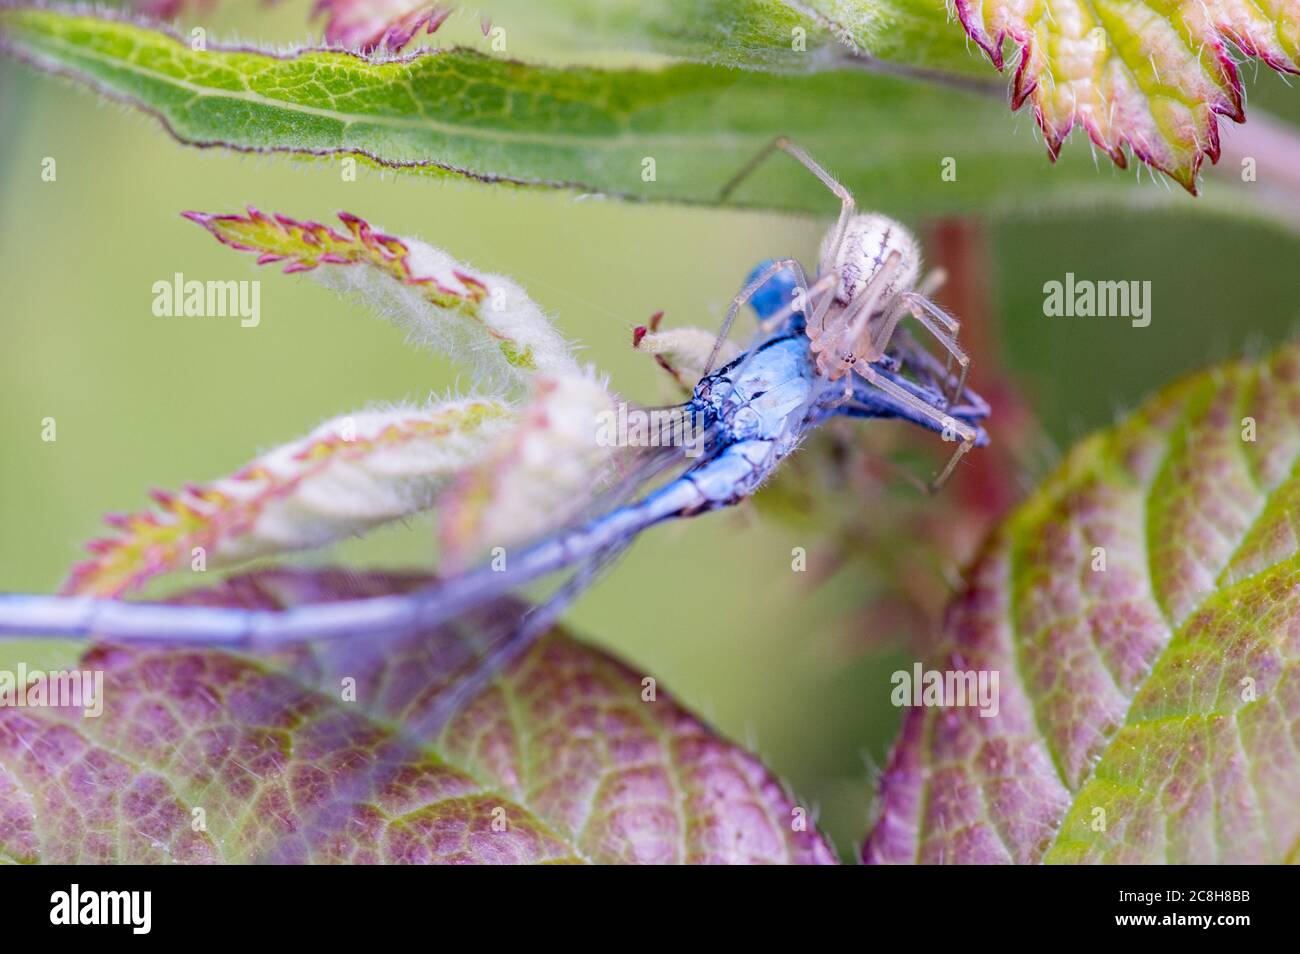 Common Candy-striped spider with azure damselfly prey. Stock Photo